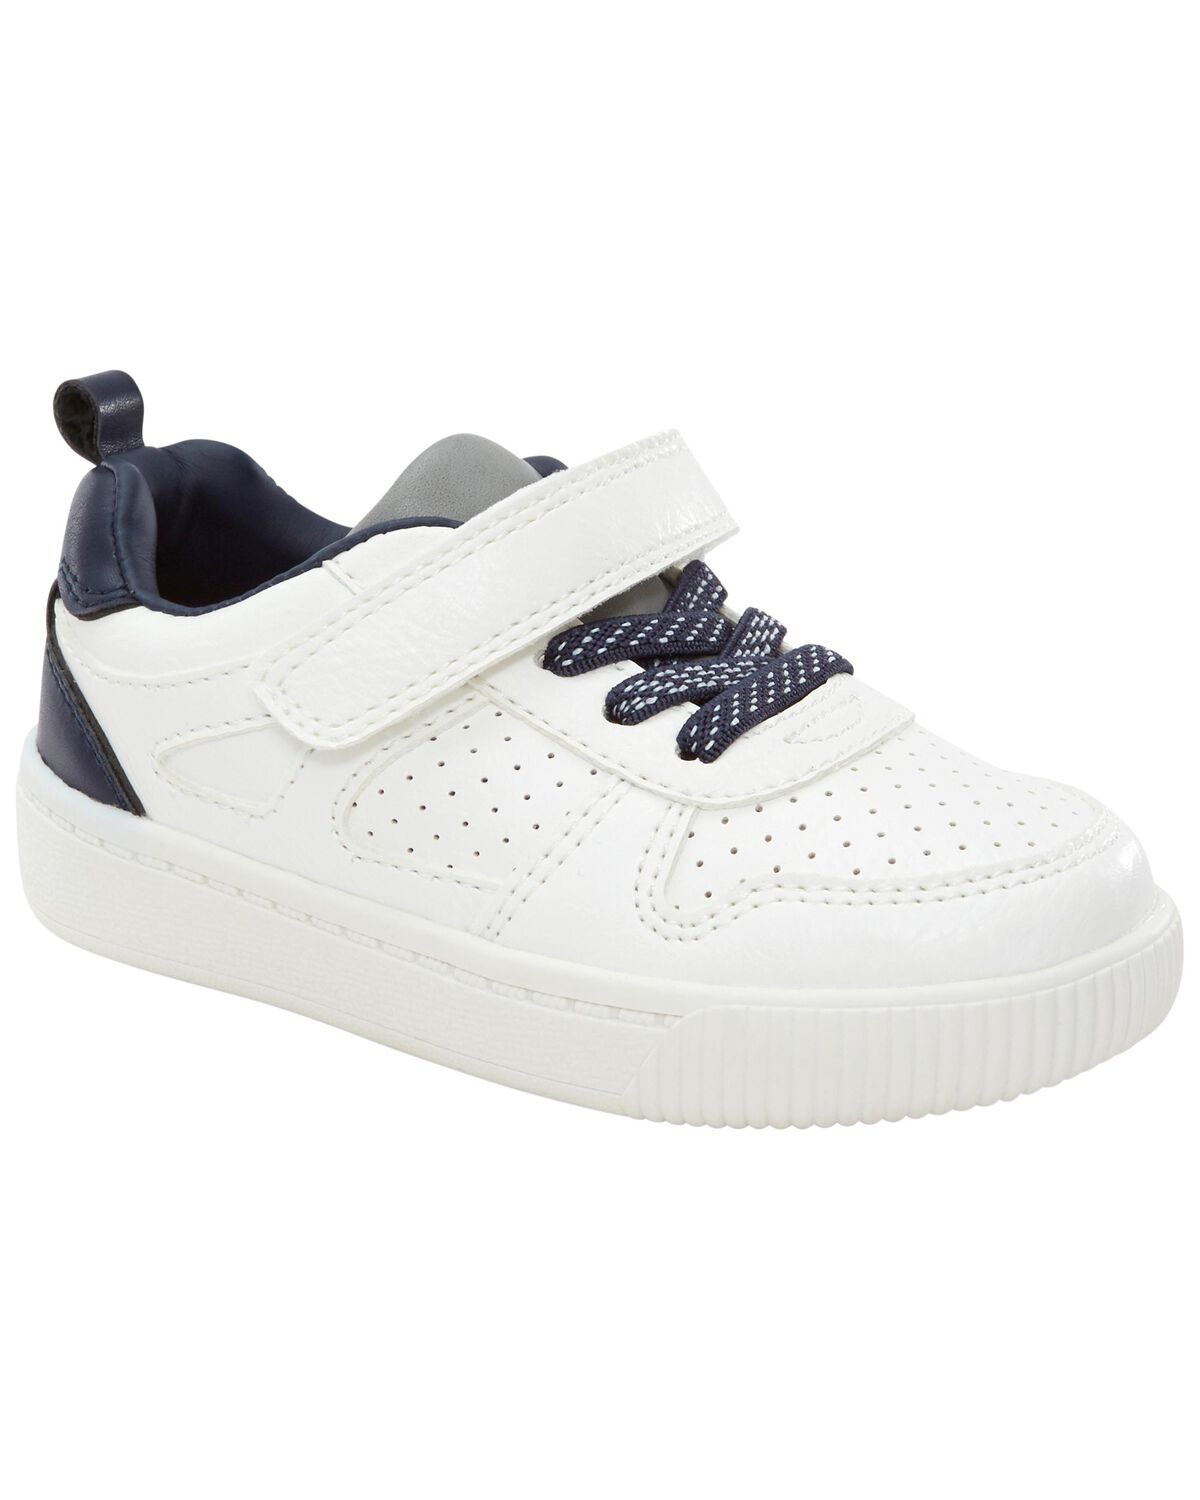 White Toddler Casual Sneakers | carters.com